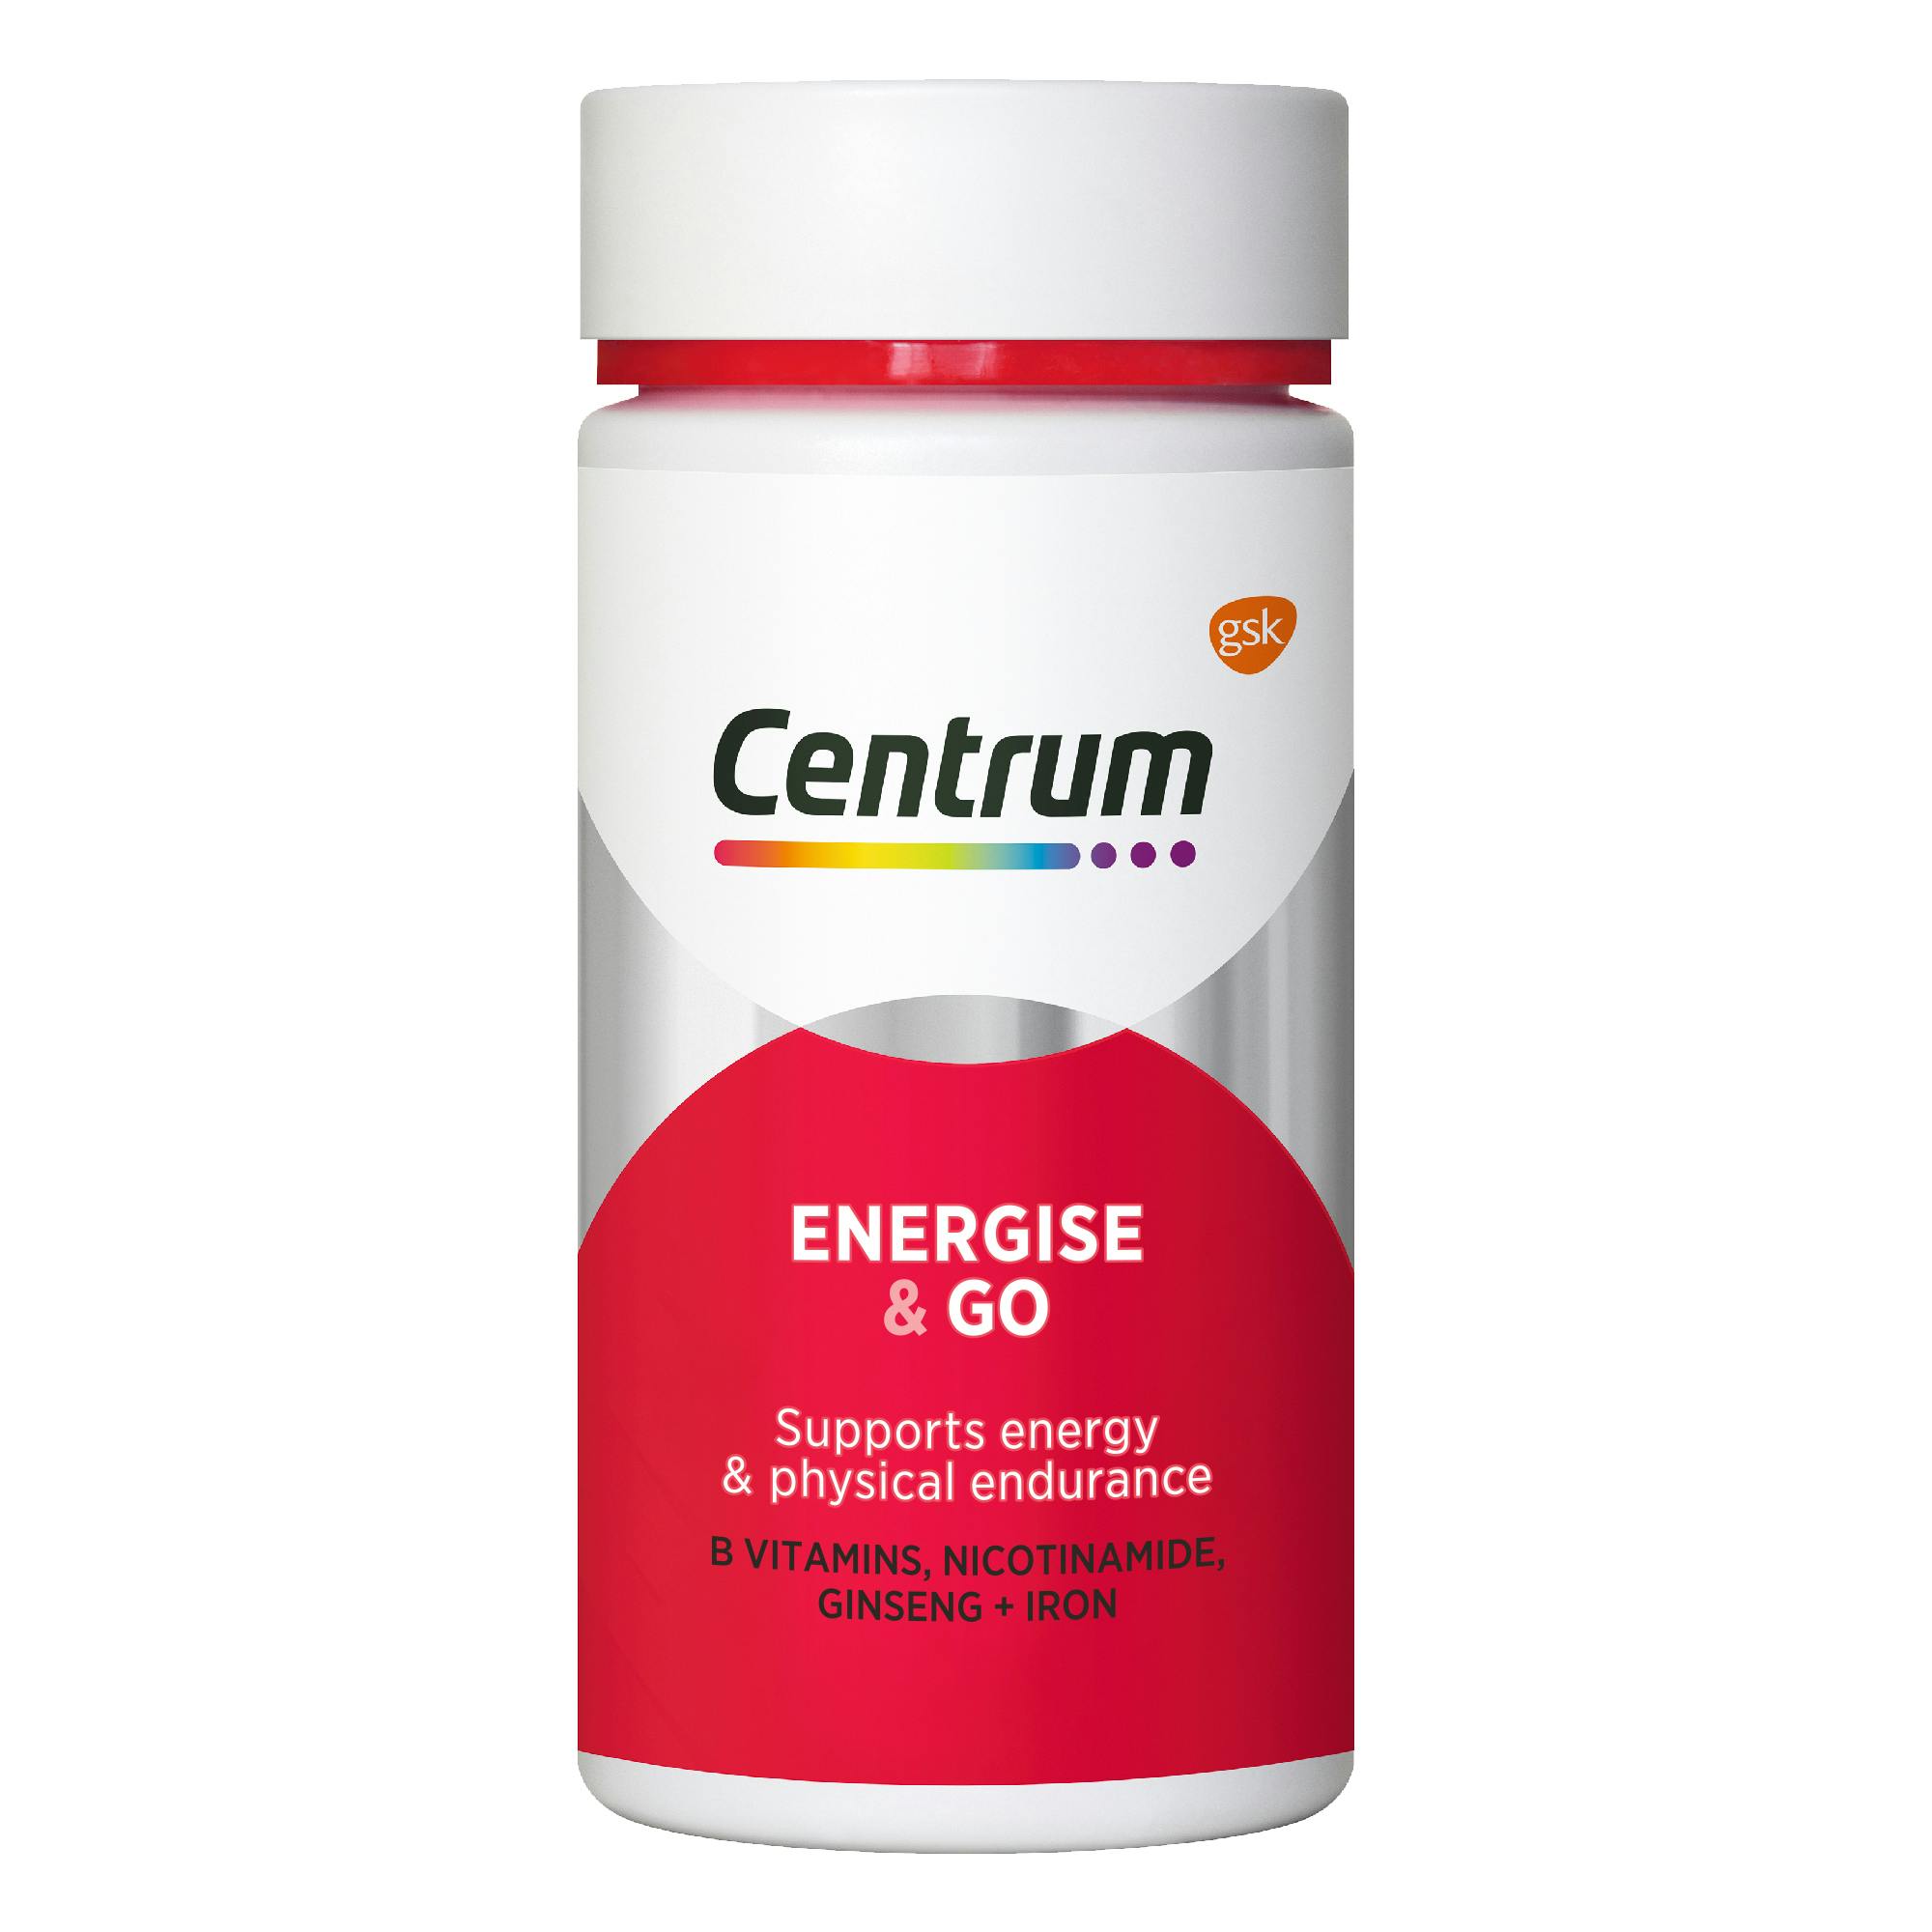 Bottle of Energise & Go from the Centrum Benefits Blend (50 capsules).